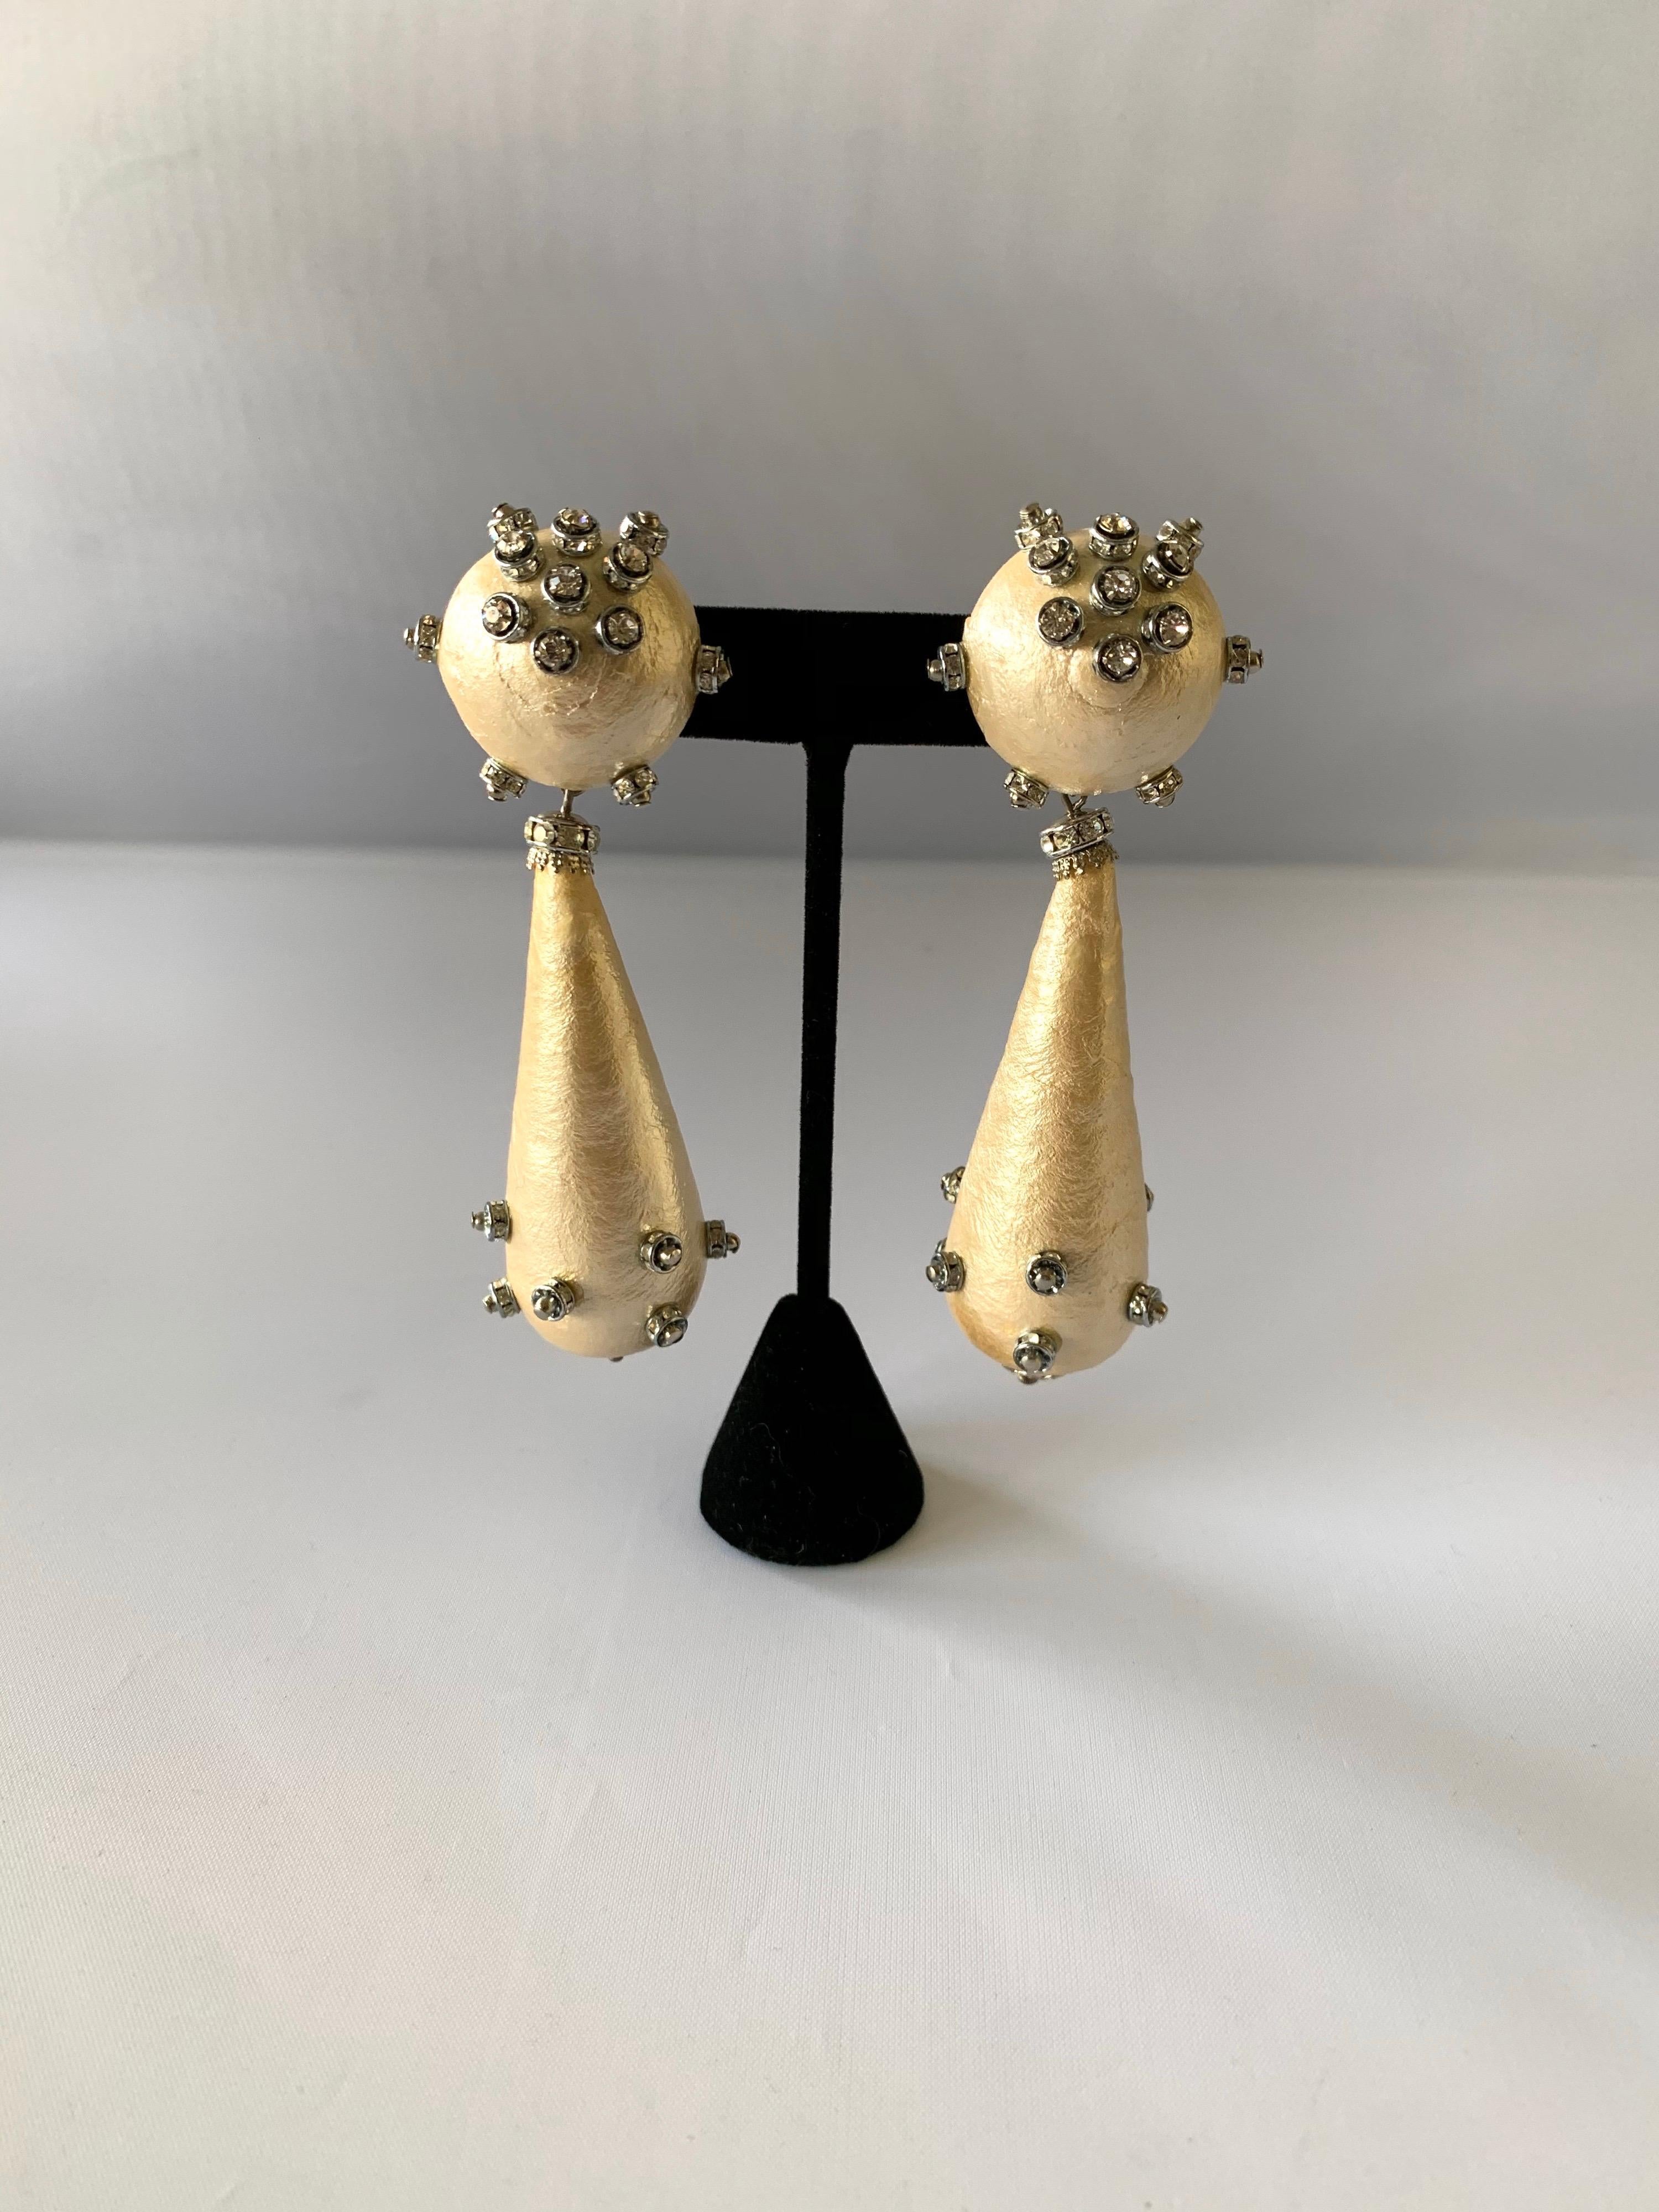 Over-sized contemporary drop statement earrings comprised out of cotton nacred pearls - the earrings are accented by silver-tone details and diamante 